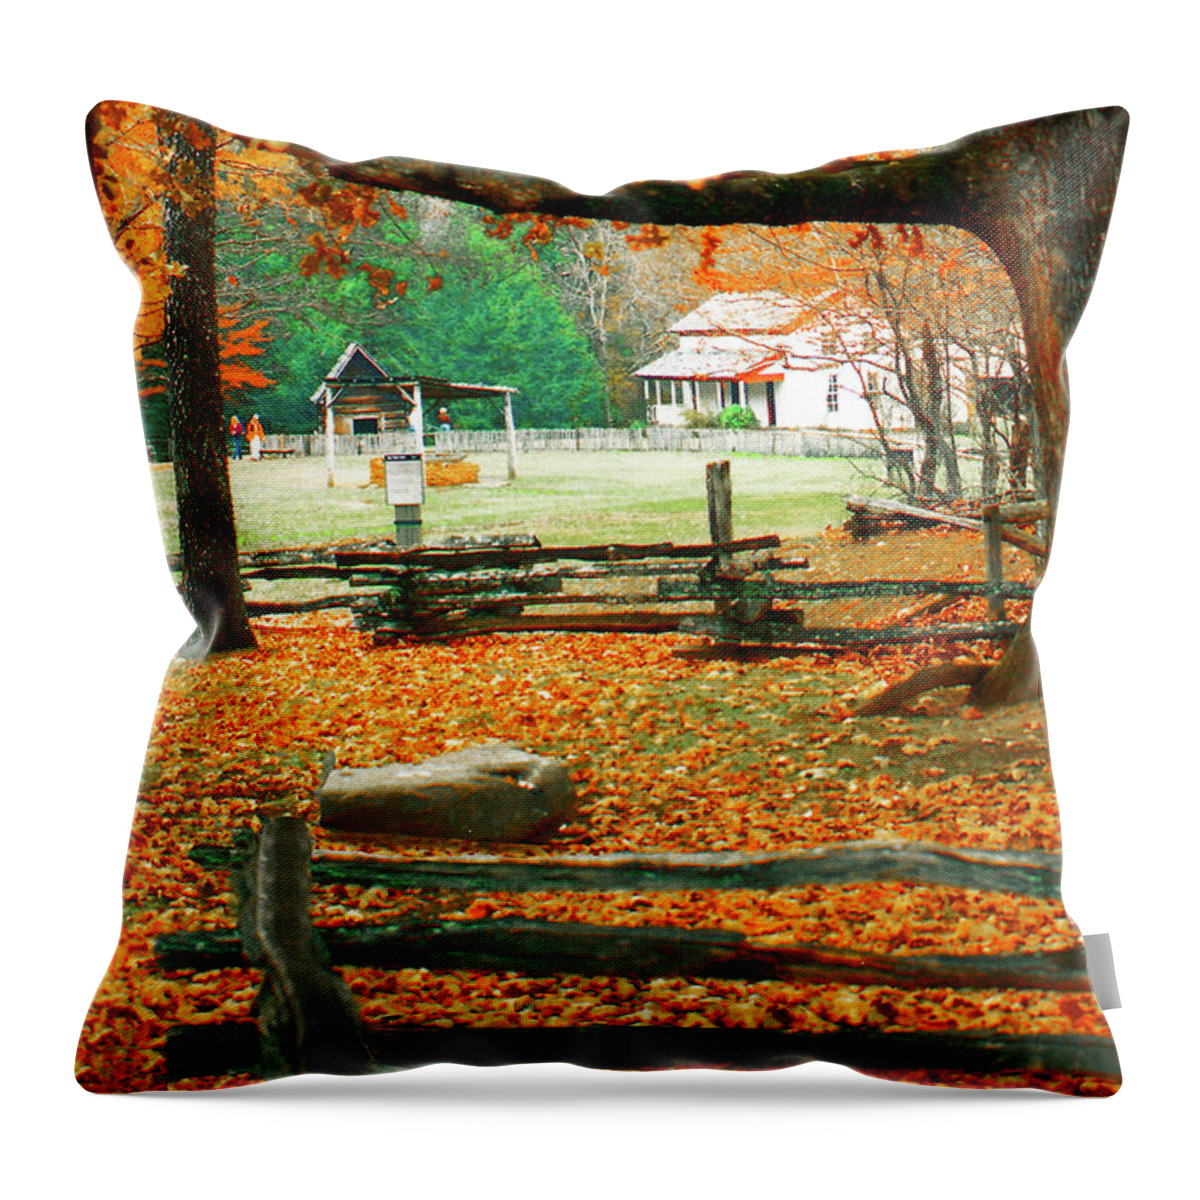 Autumn Throw Pillow featuring the painting Autumn In Cades Cove #1 by CHAZ Daugherty